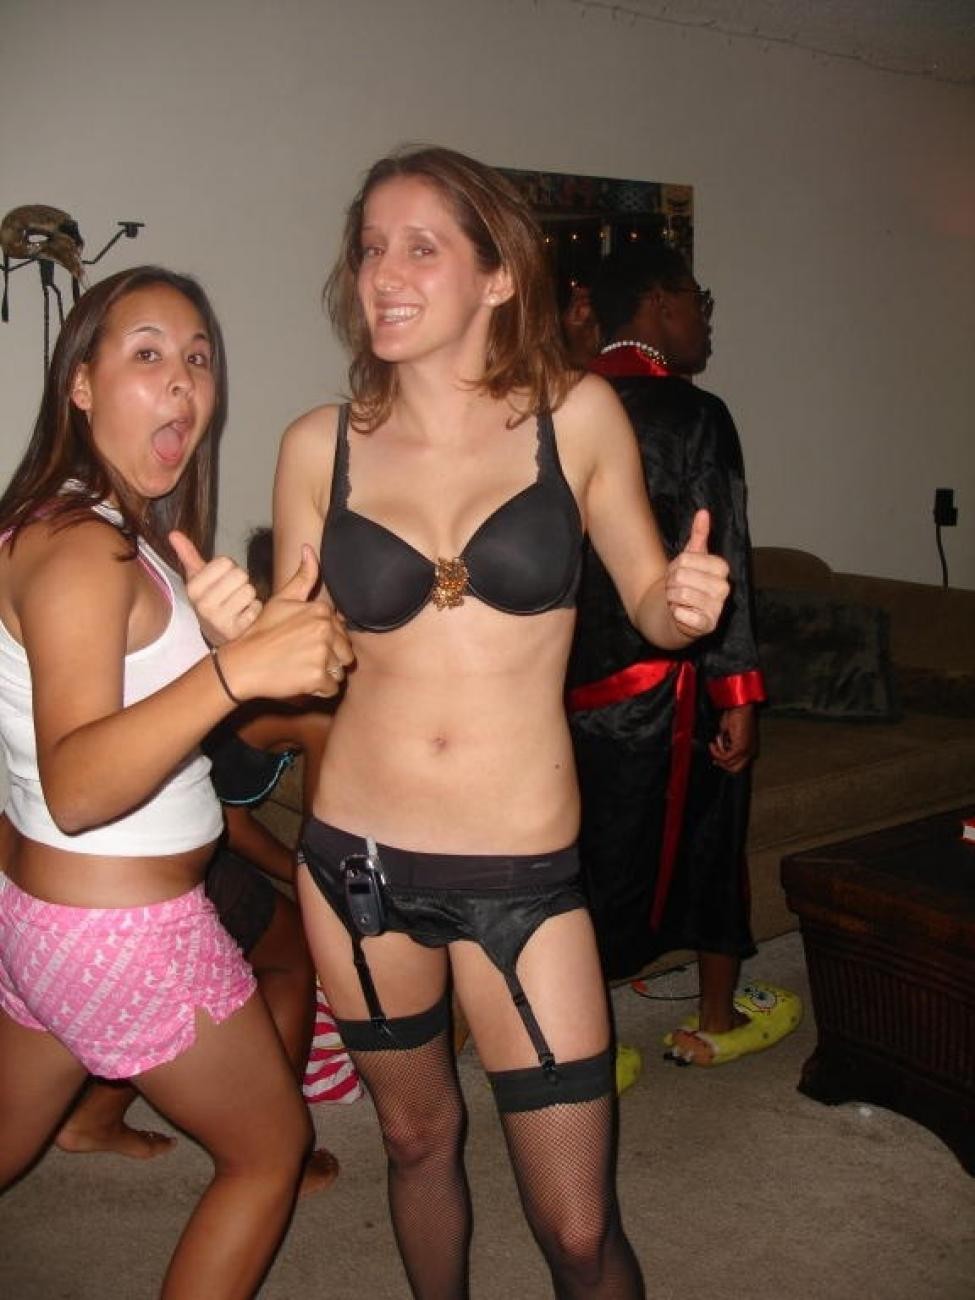 Hot pics of wild and naughty party chicks having fun #77130935